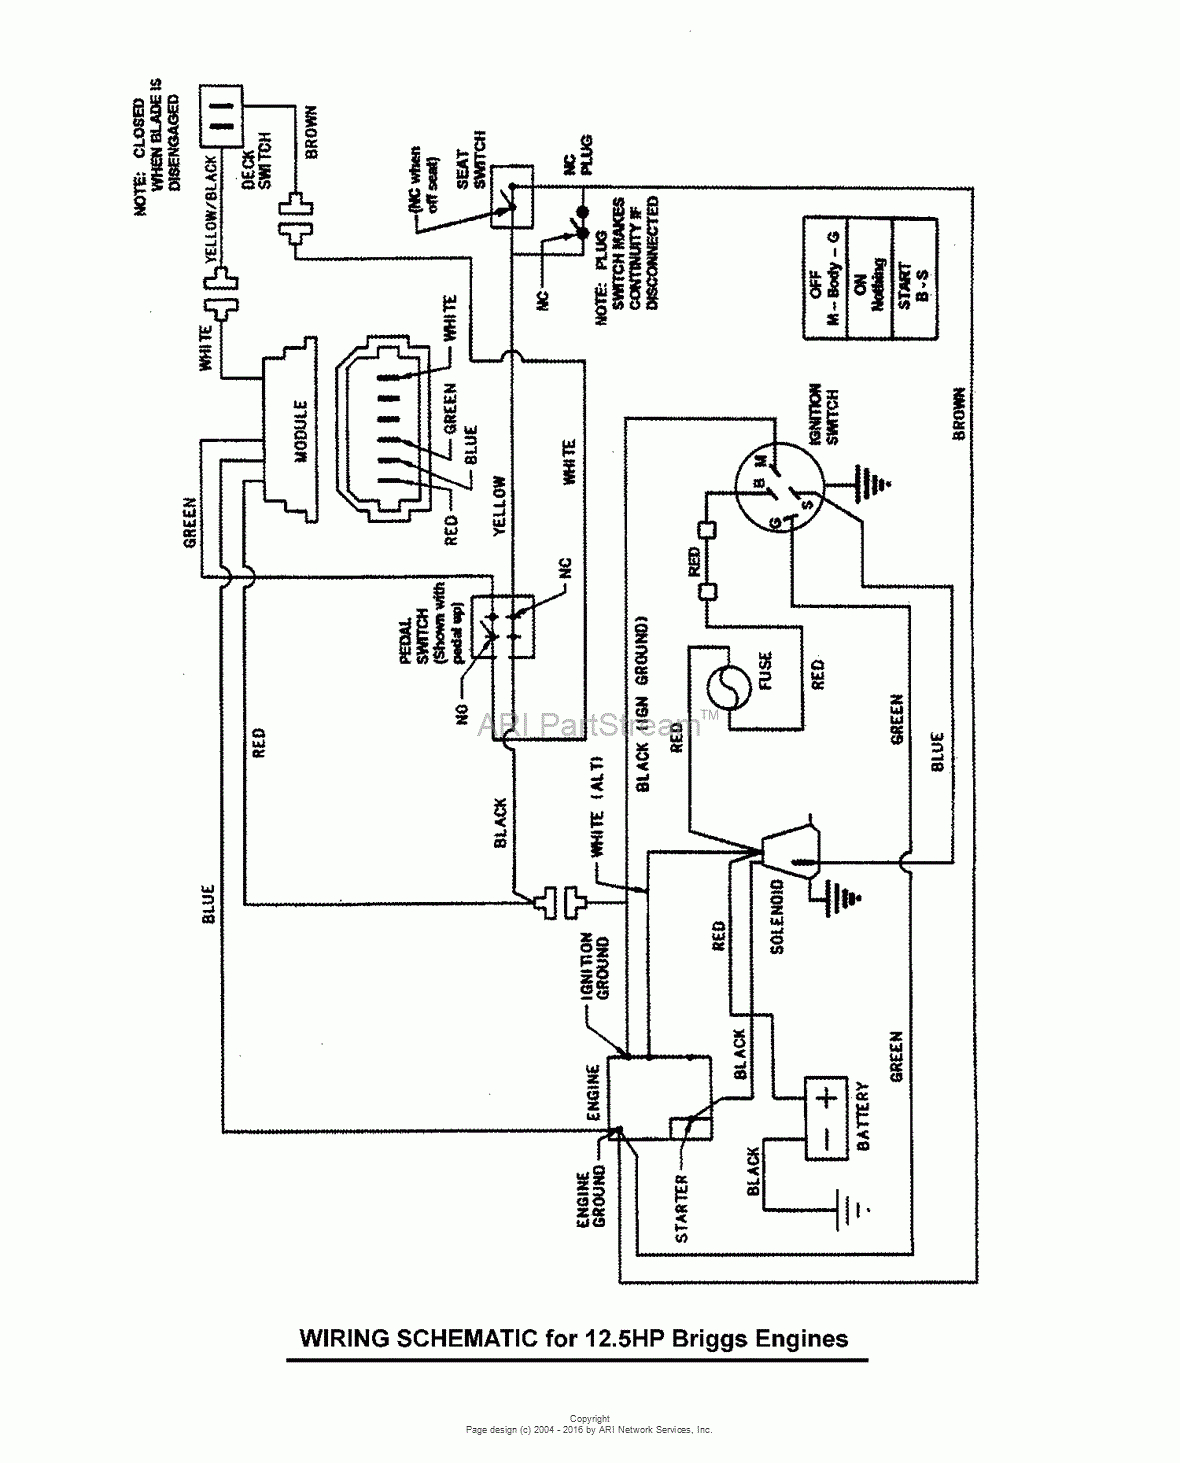 24 Hp Briggs And Stratton Wiring Diagram - Data Wiring Diagram Schematic - Briggs And Stratton Ignition Coil Wiring Diagram